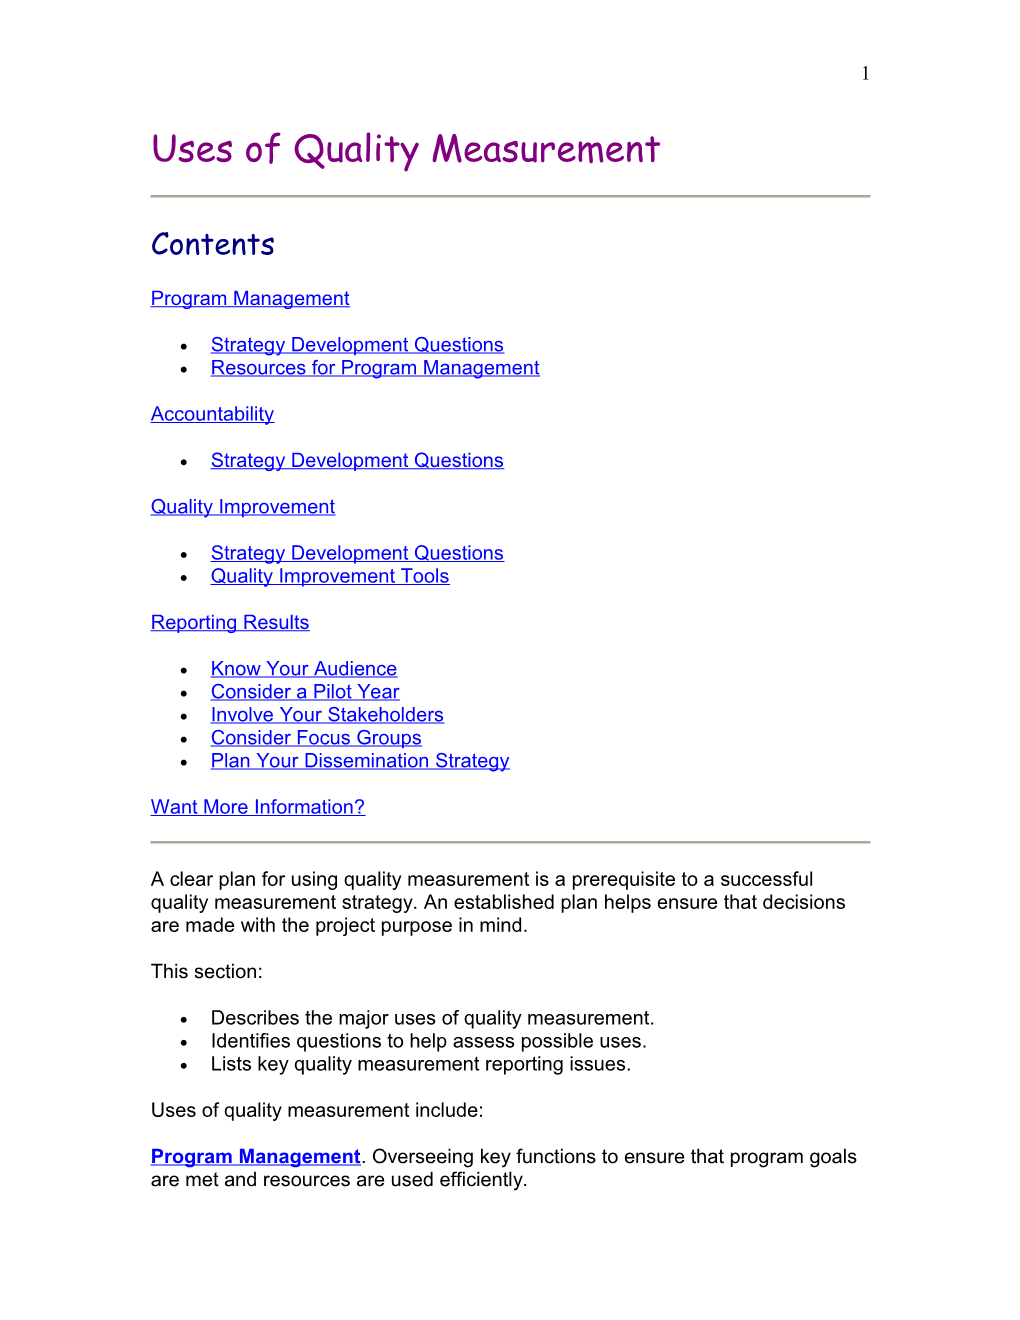 Uses of Quality Measurement